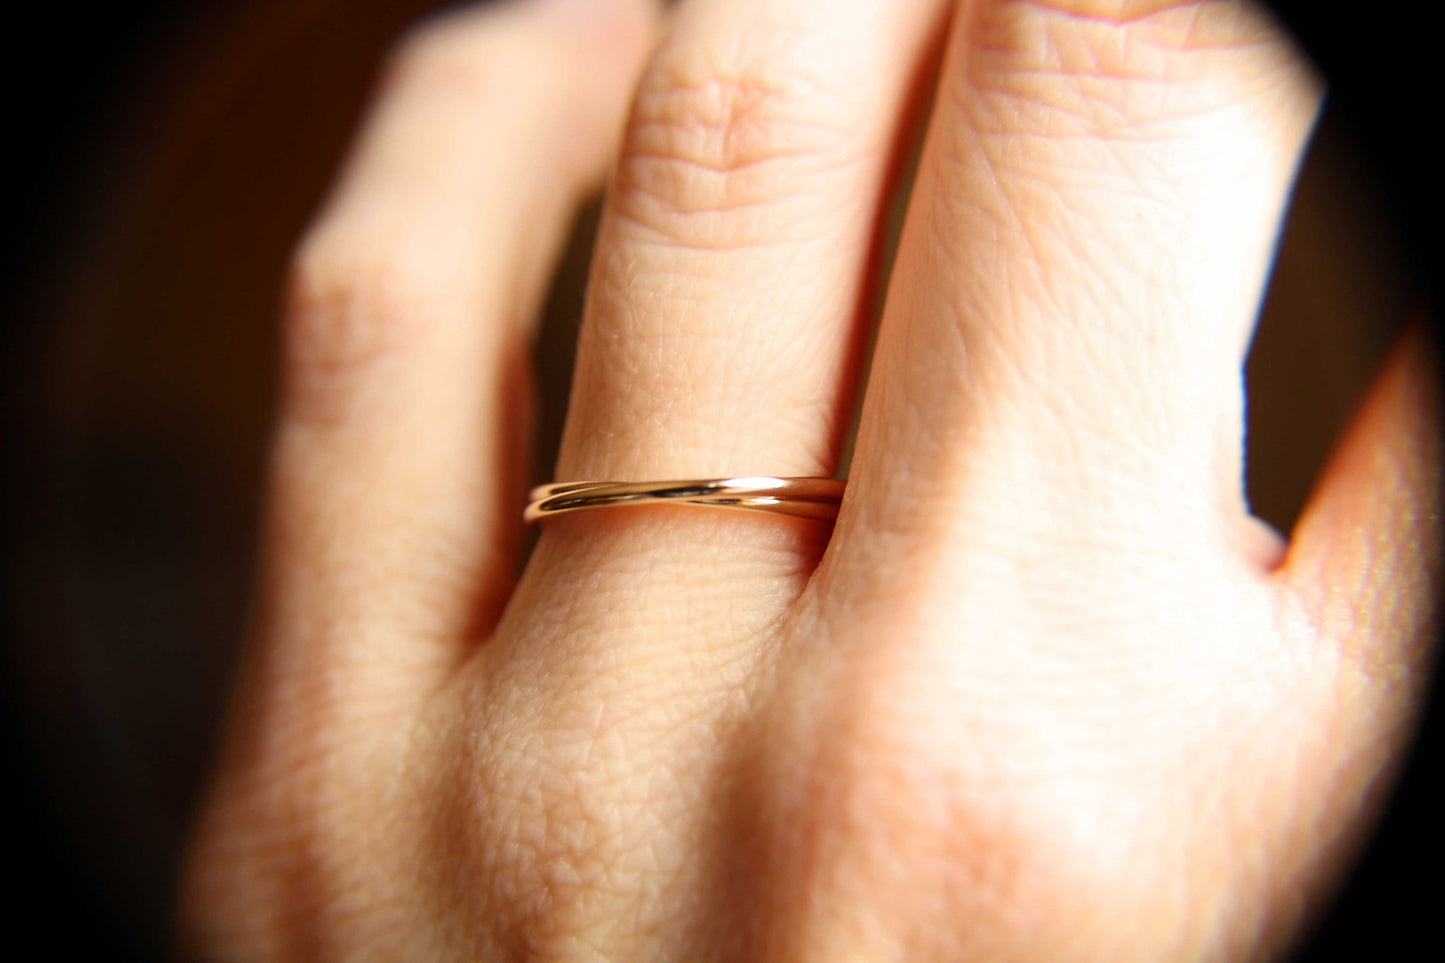 Gold Interlocking Thumb Rings,Thumb Rings,Gold Thumb Ring,Simple Rings,Rolling Ring,Stacking Rings, Minimalist Rings,Unique Ring,Rose Gold